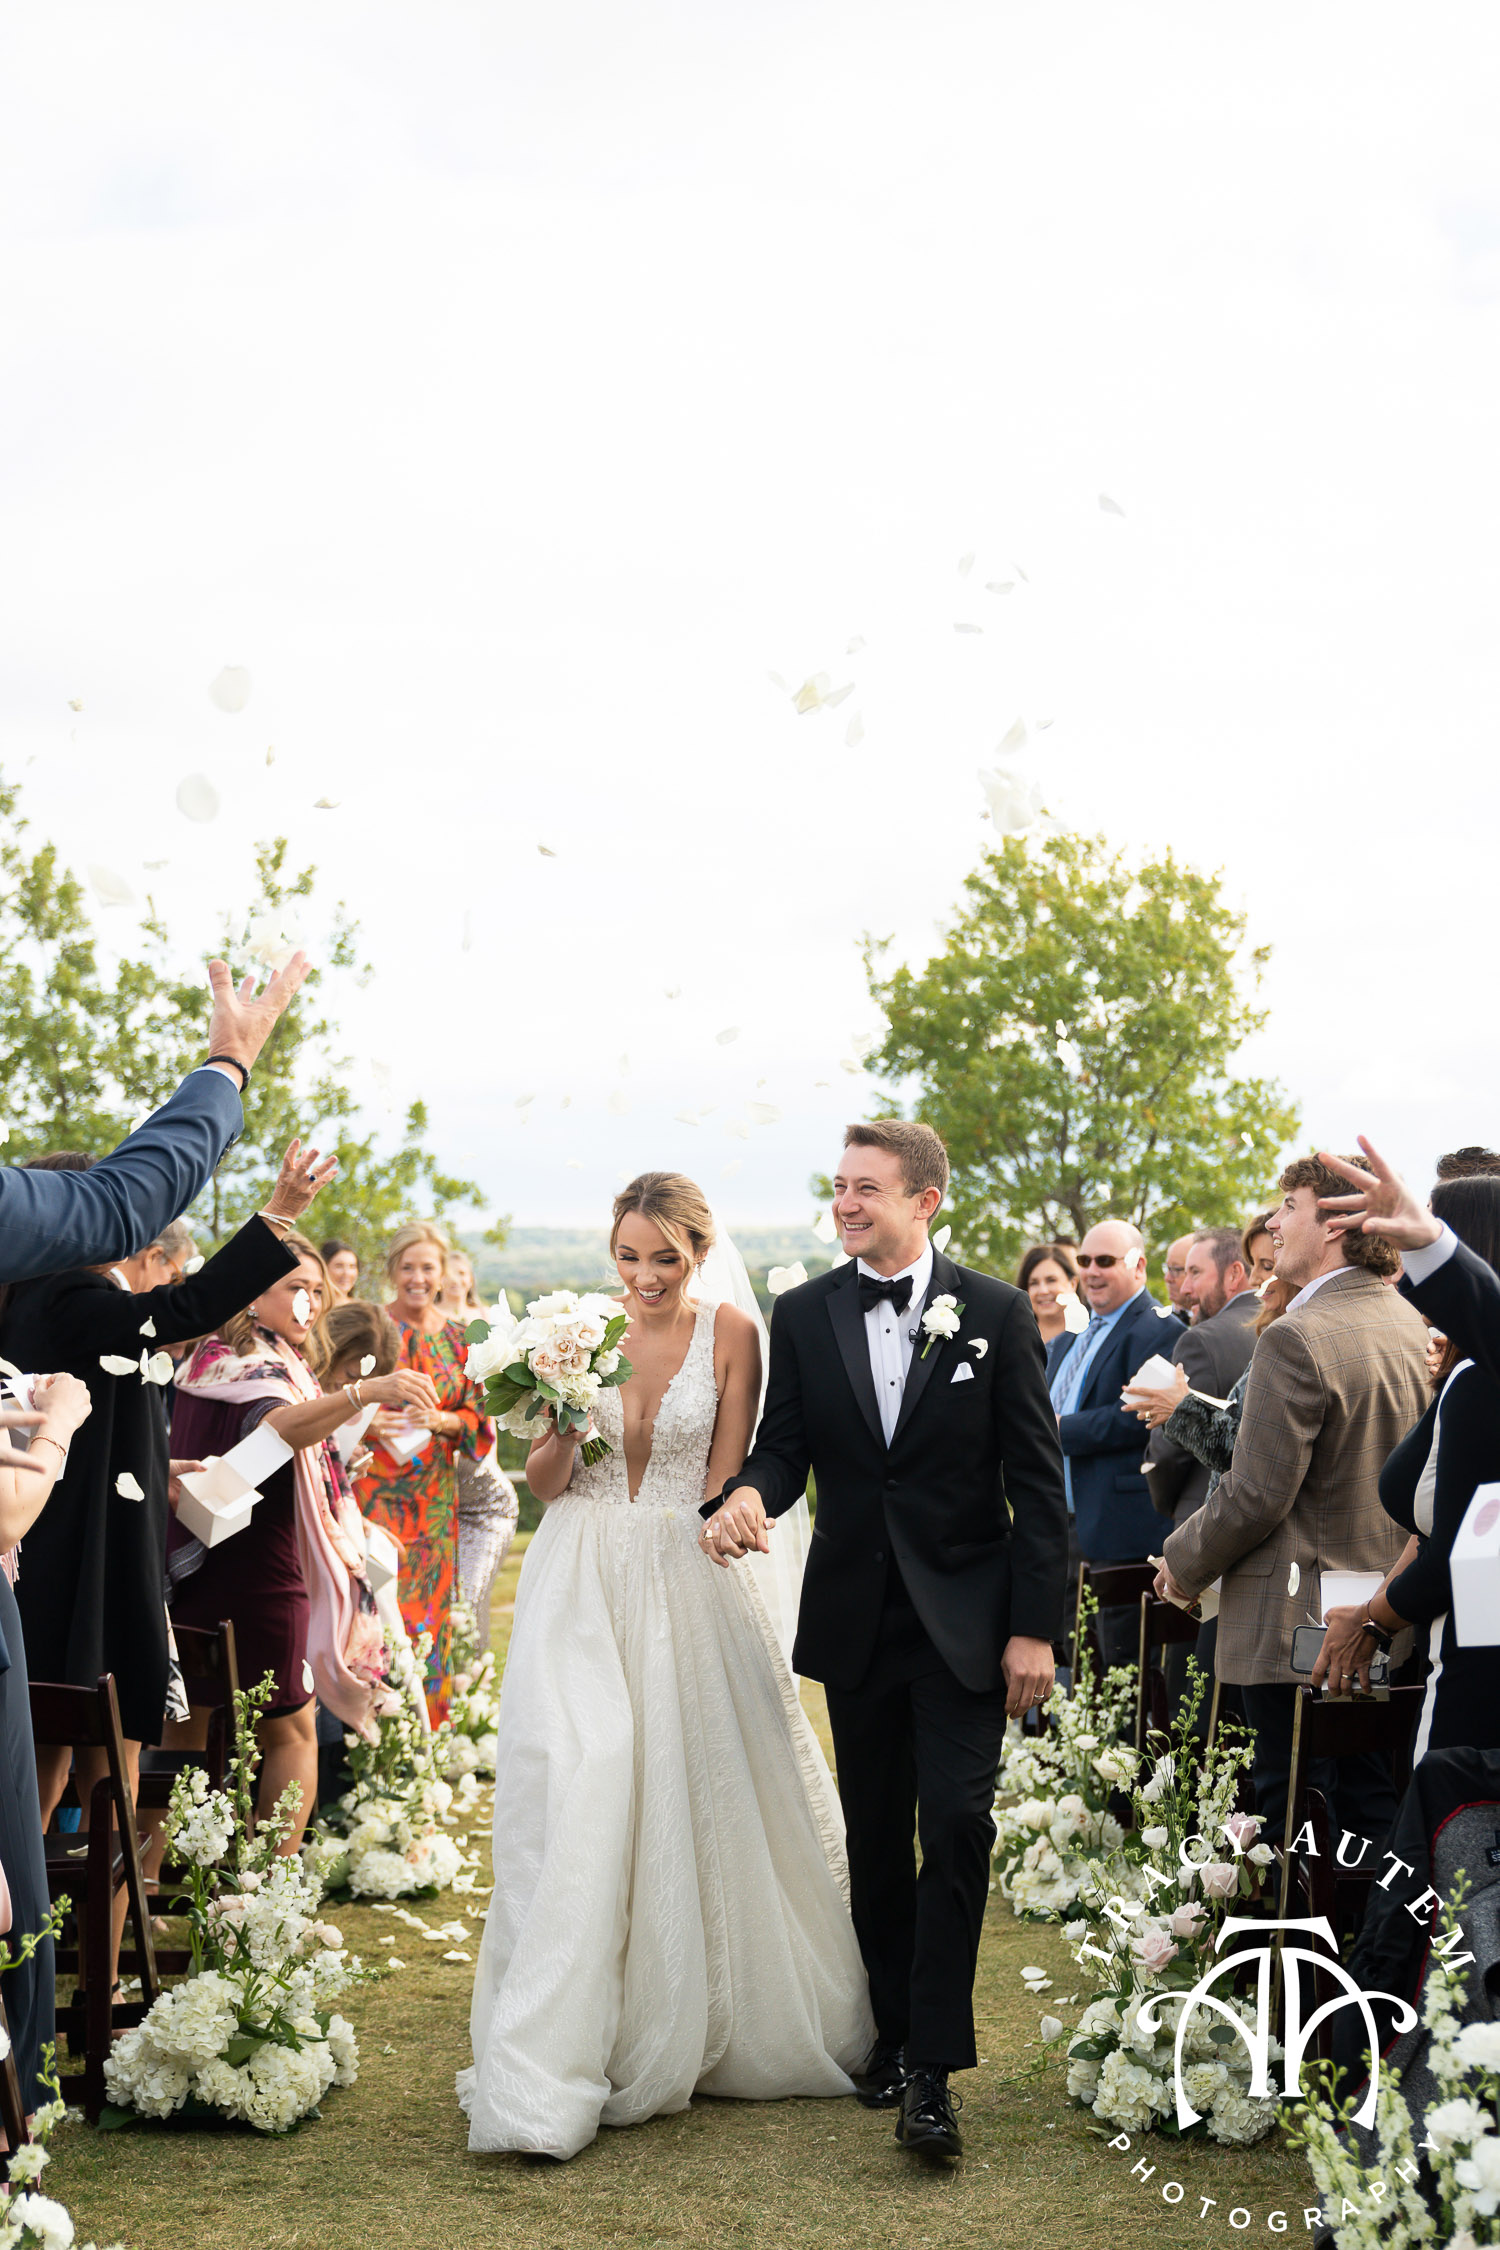 Outdoor ceremony recessional with couple walking and flower petals being thrown